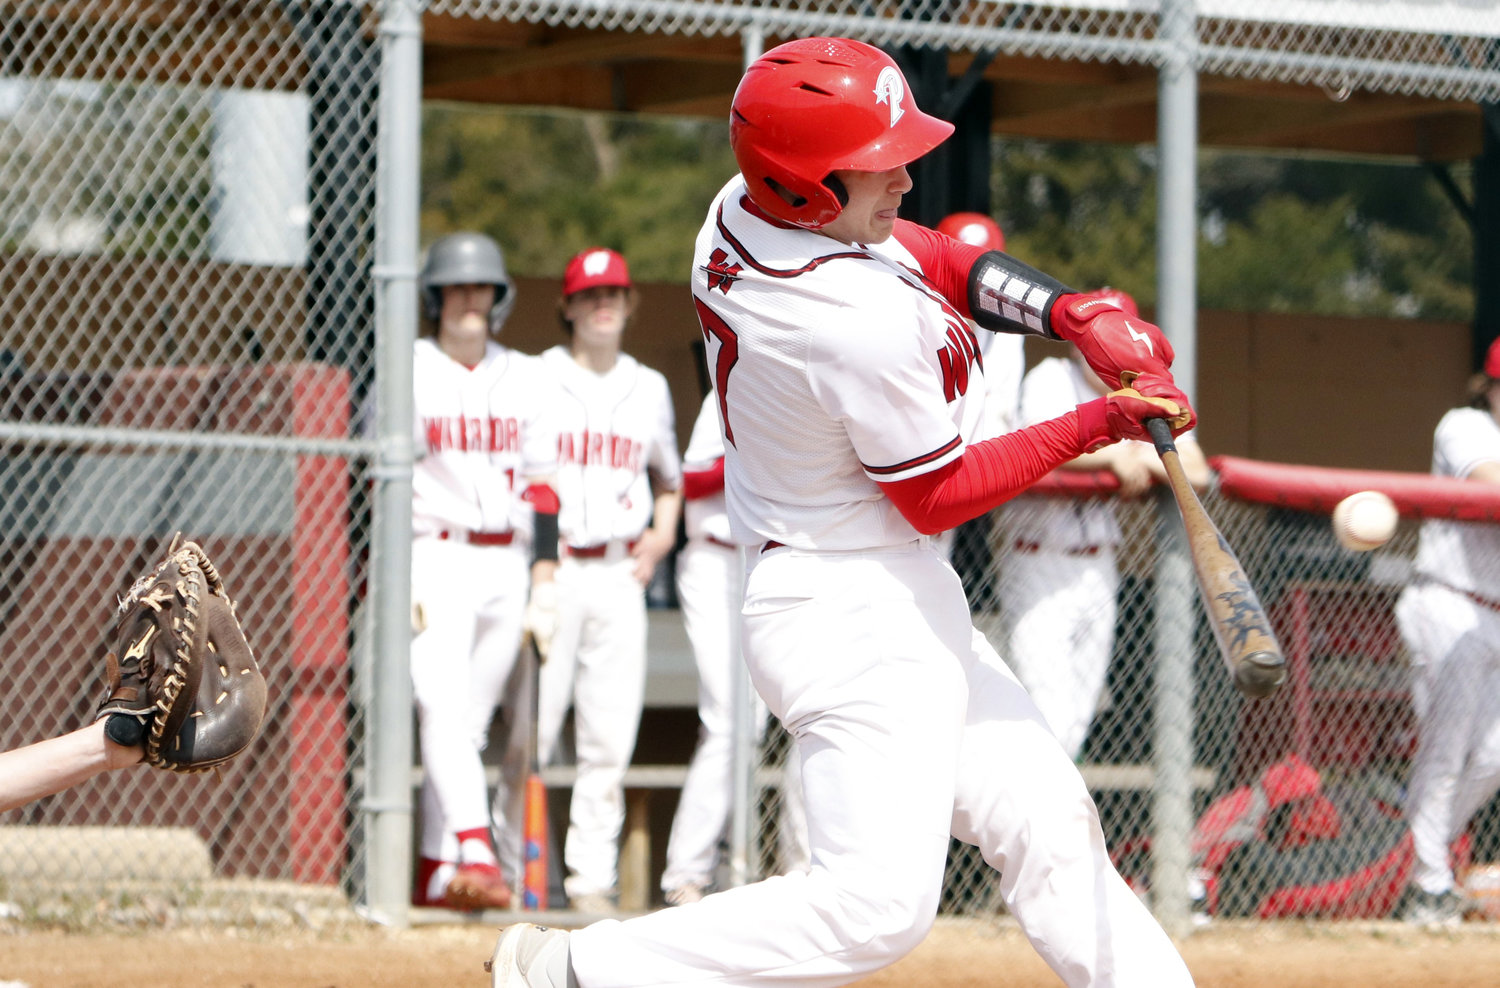 Warrenton leadoff hitter Austin Haas swings at a pitch during the first inning of Warrenton’s win over Winfield.